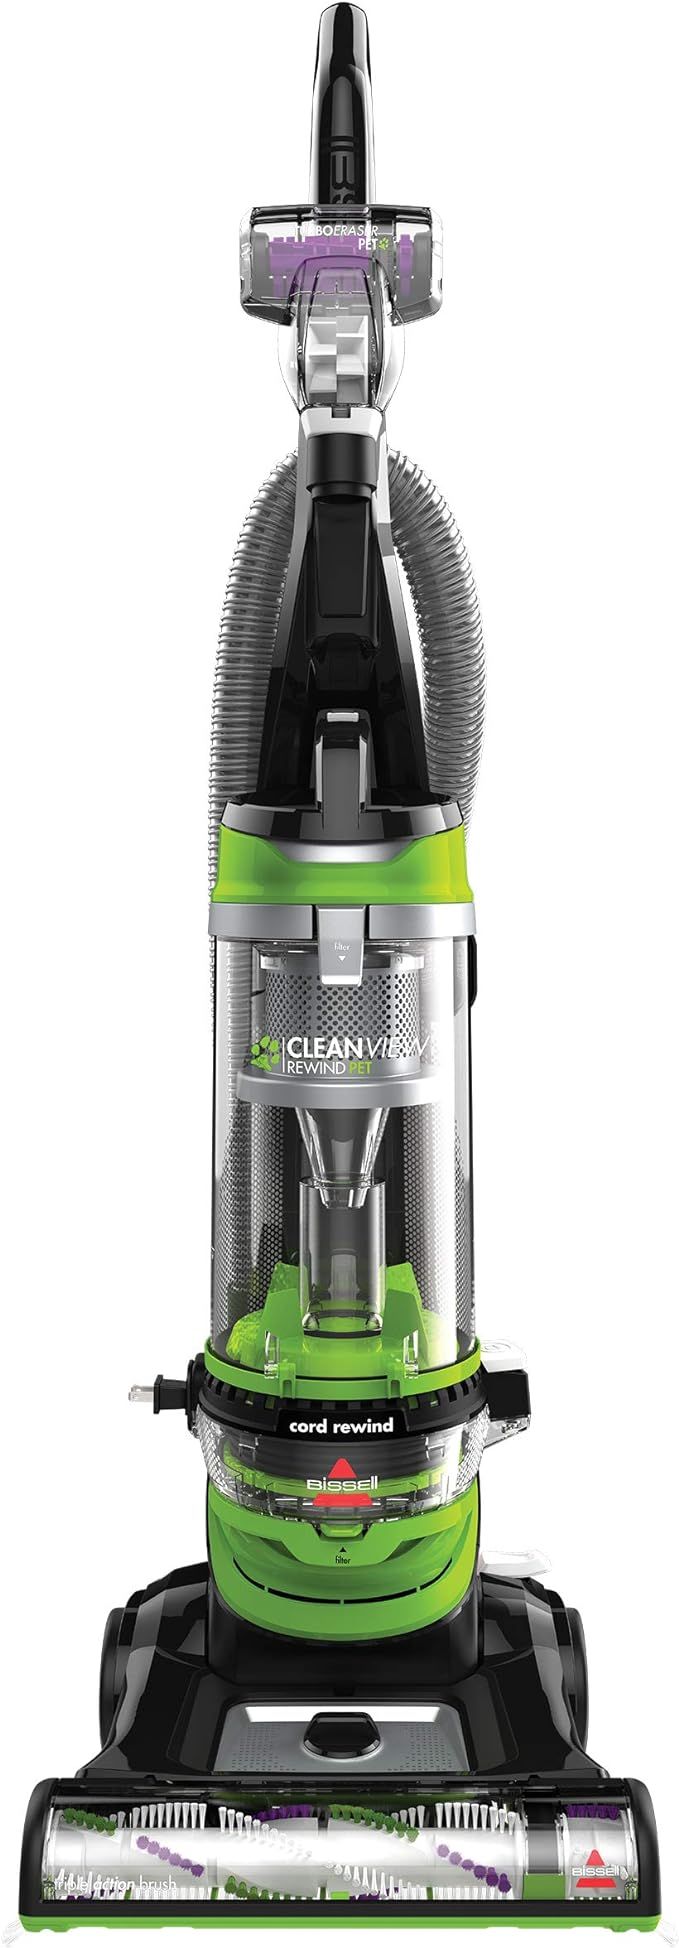 BISSELL Cleanview Rewind Pet Deluxe Upright Vacuum Cleaner, 24899, Green | Amazon (US)